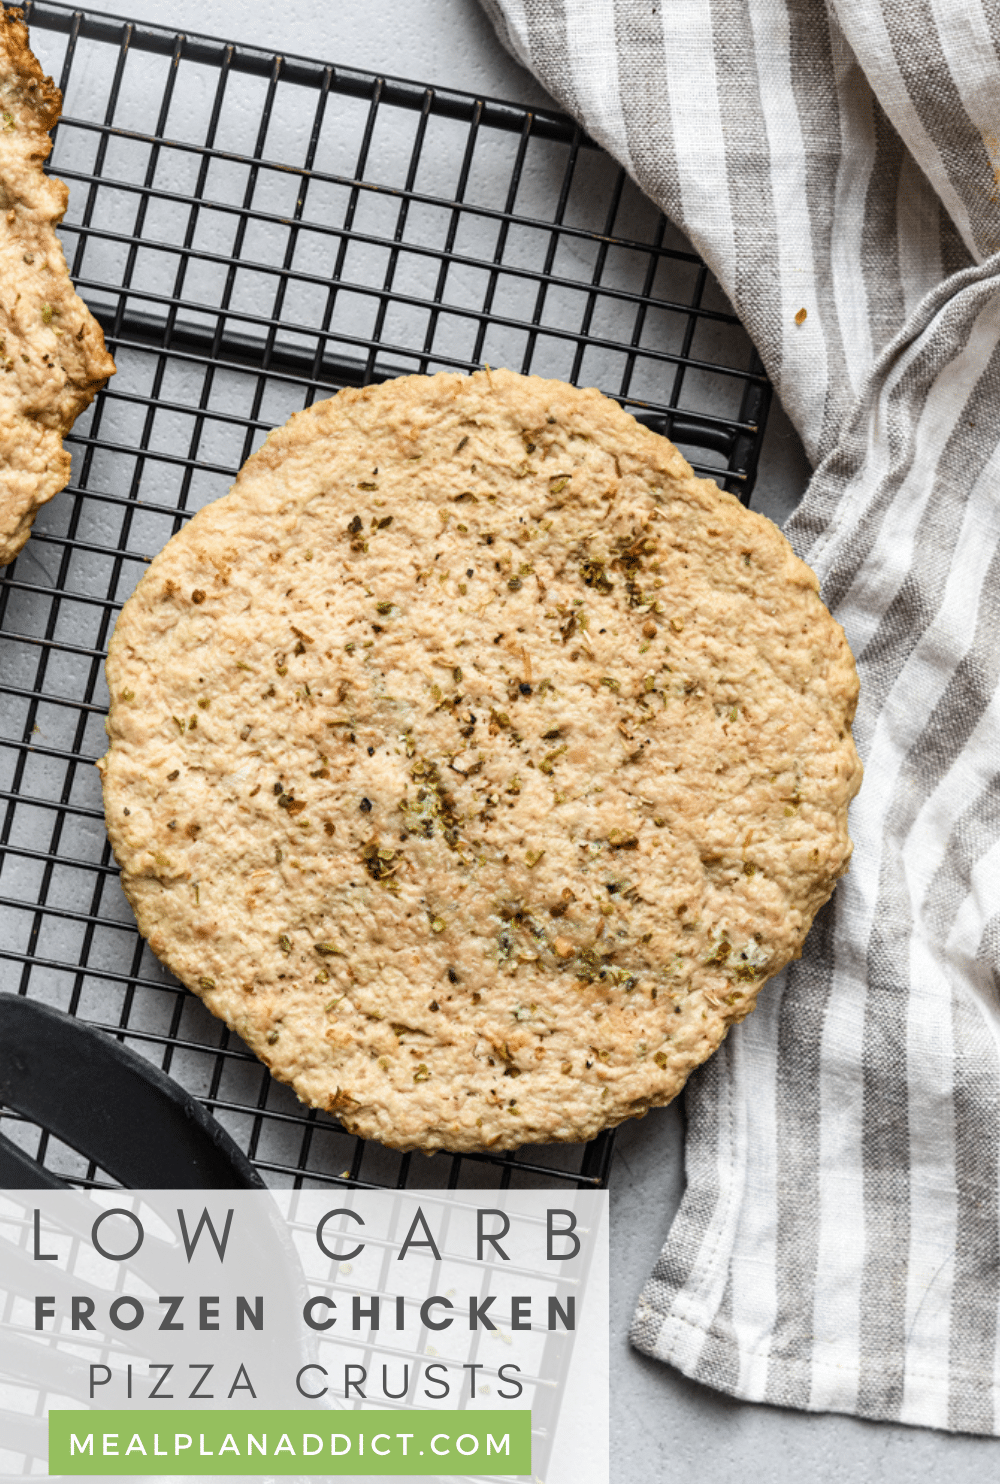 Low carb pizza crust pin for pinterest